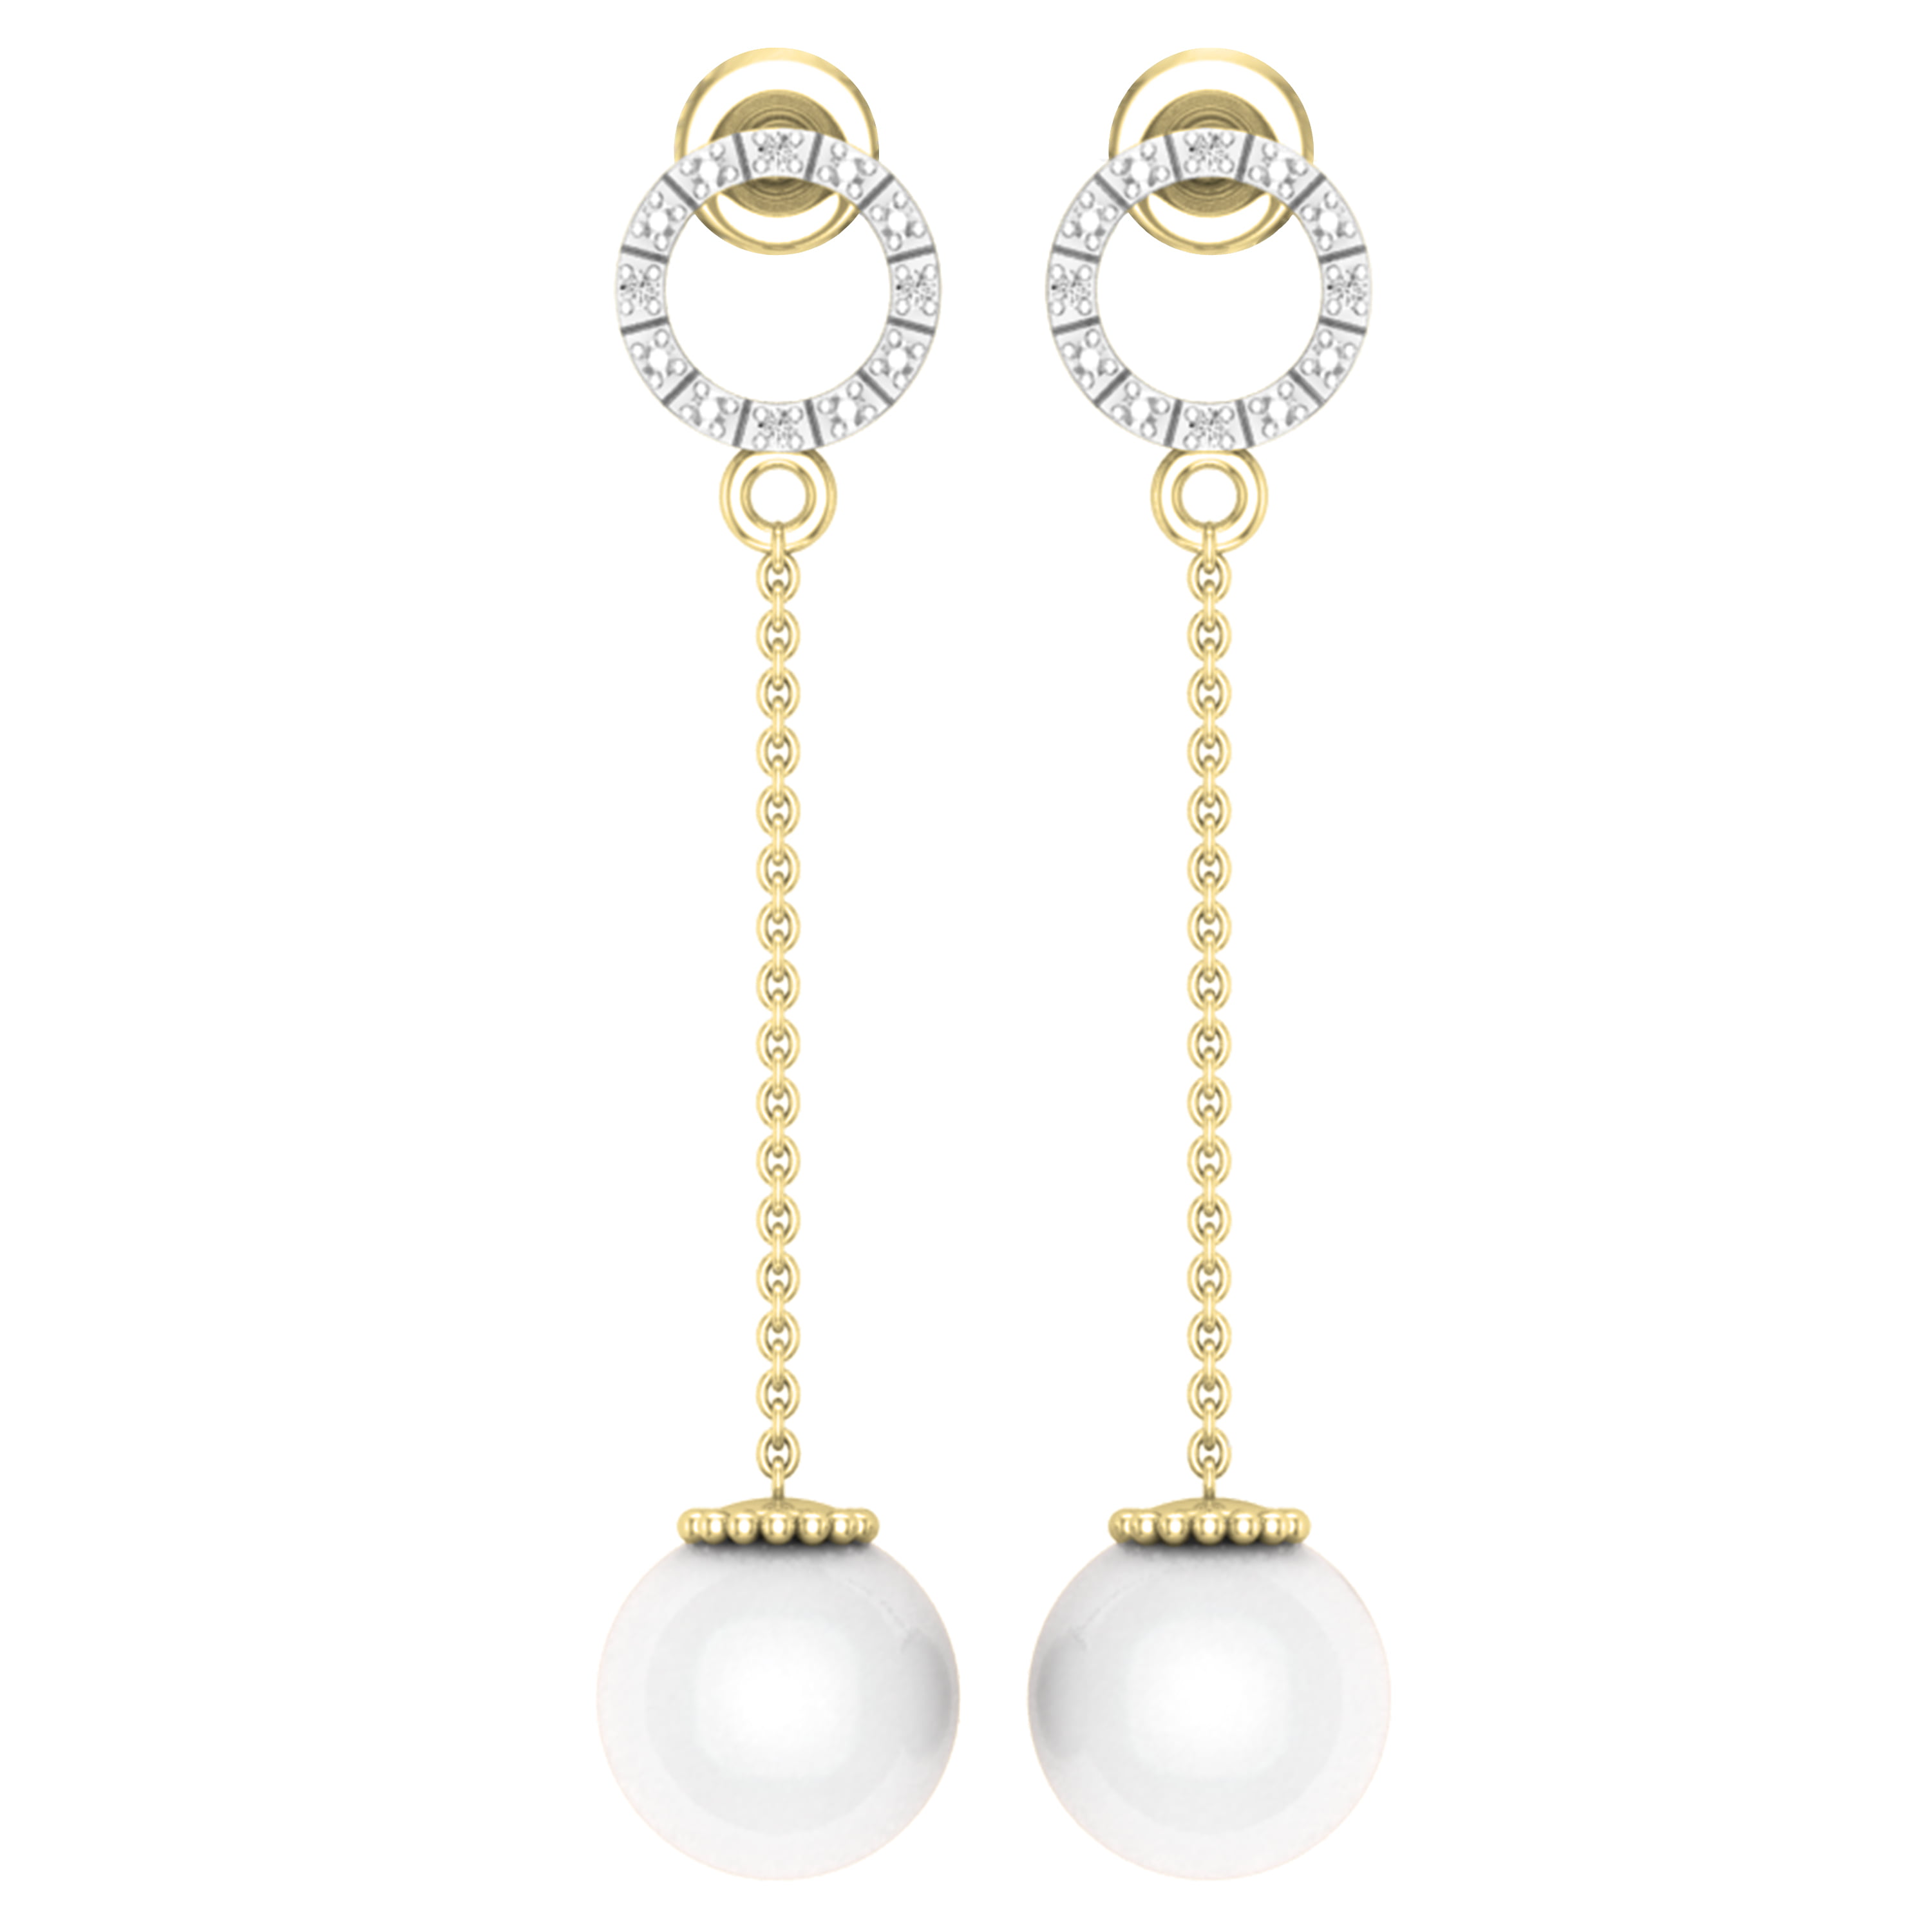 Details about   Natural White baroque pearl Earring 18k Ear Drop Party Fashion Gift Jewelry 